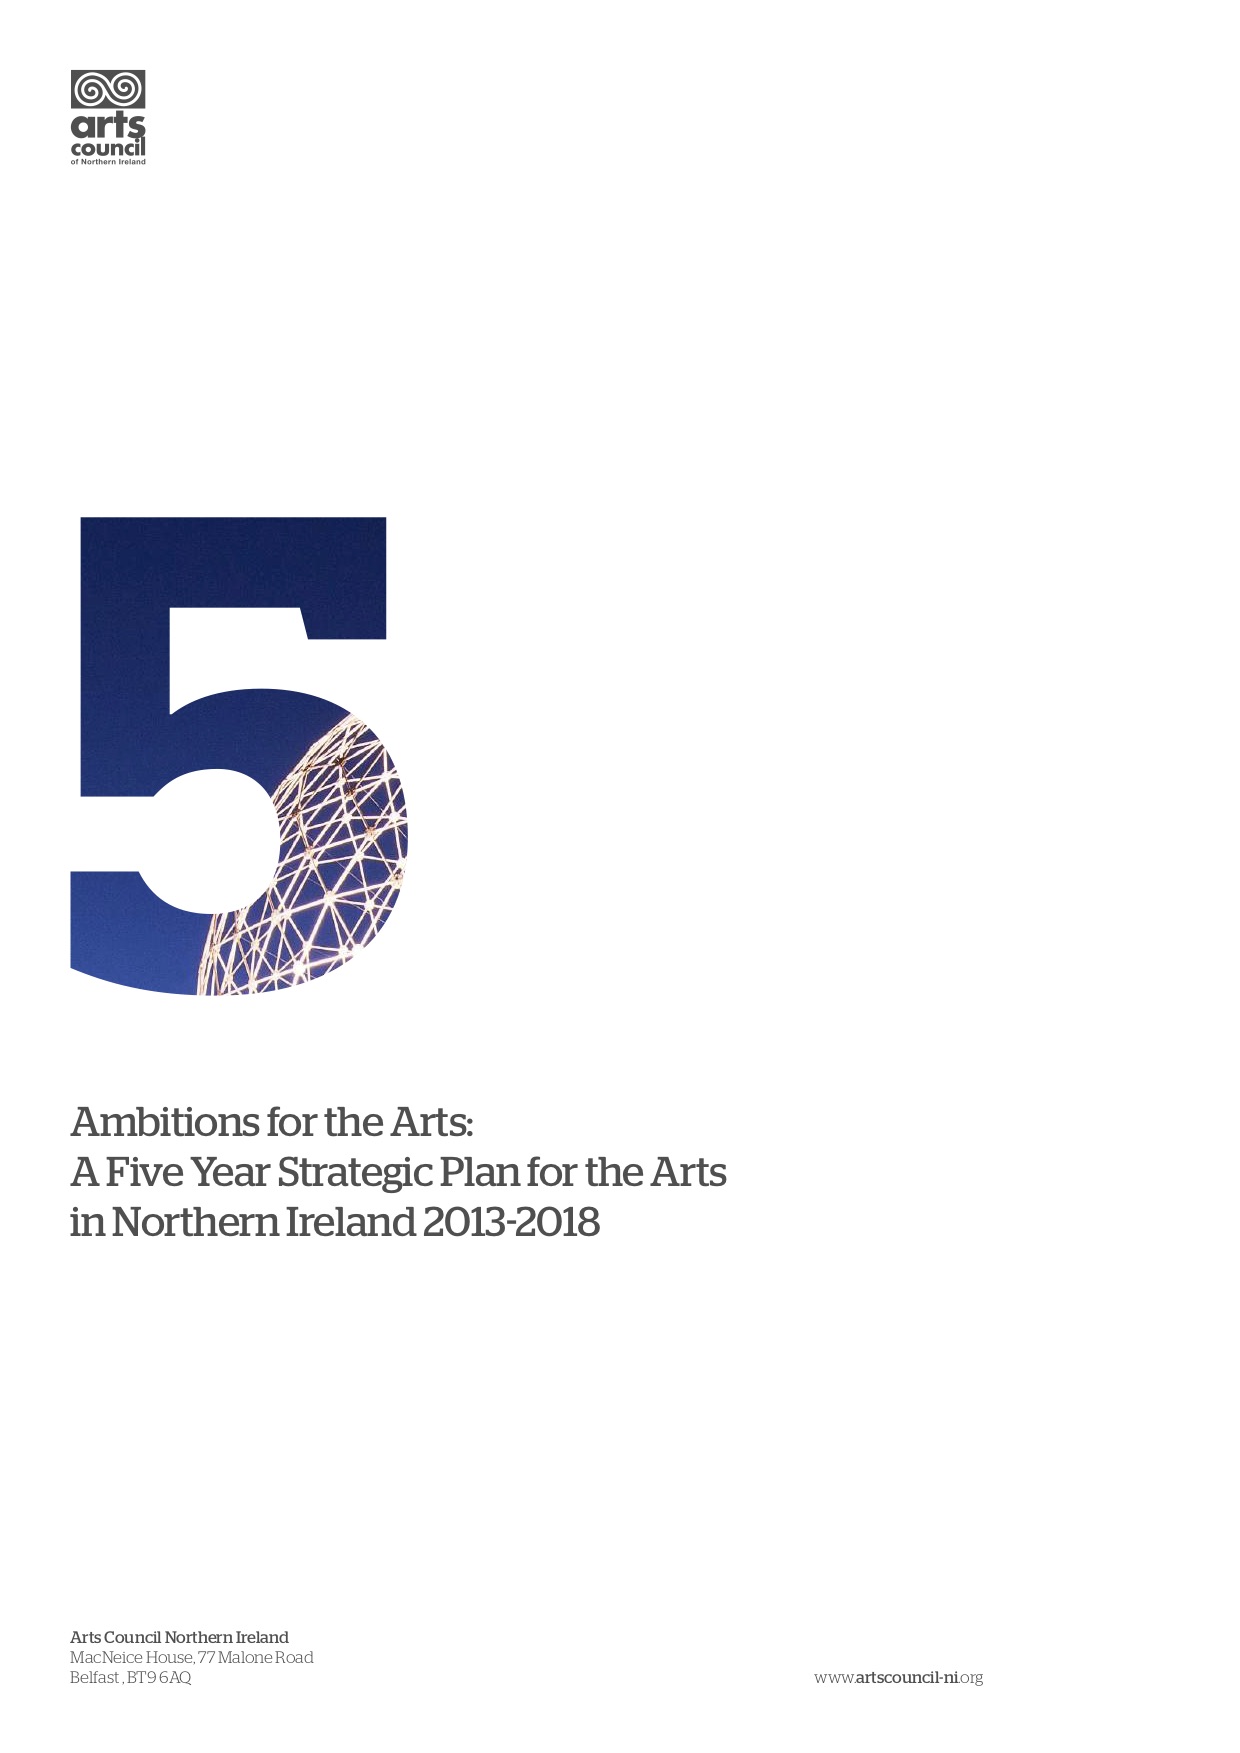 "Ambitions for the Arts: A Five Year Strategic Plan for Arts in Northern Ireland 2013-2018"